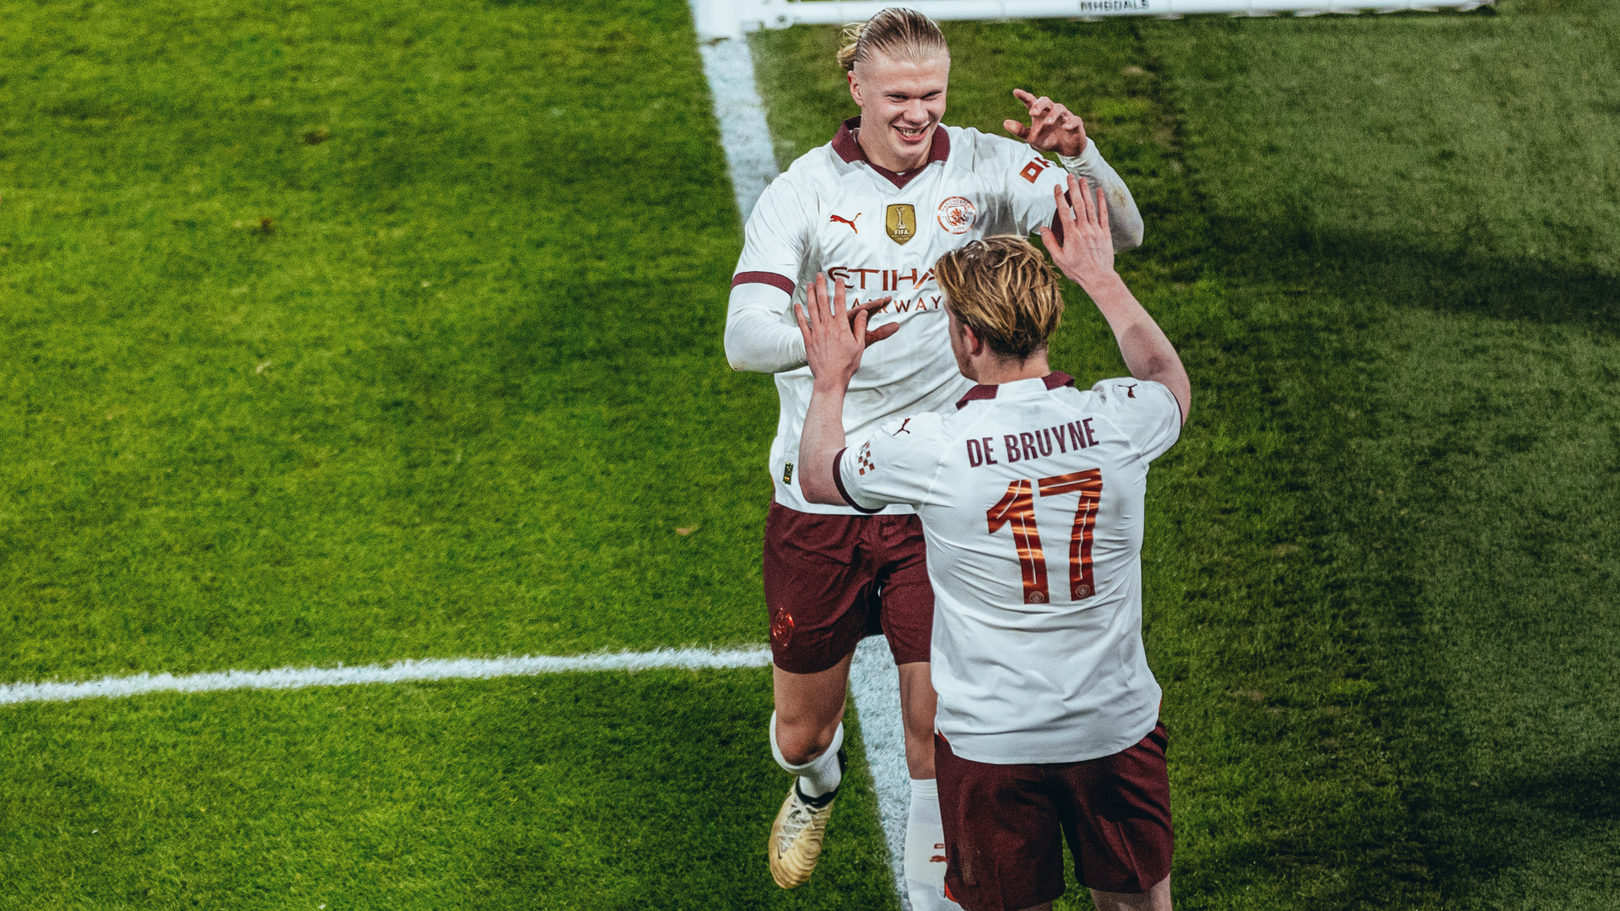 Haaland: It's a pleasure to play with De Bruyne!